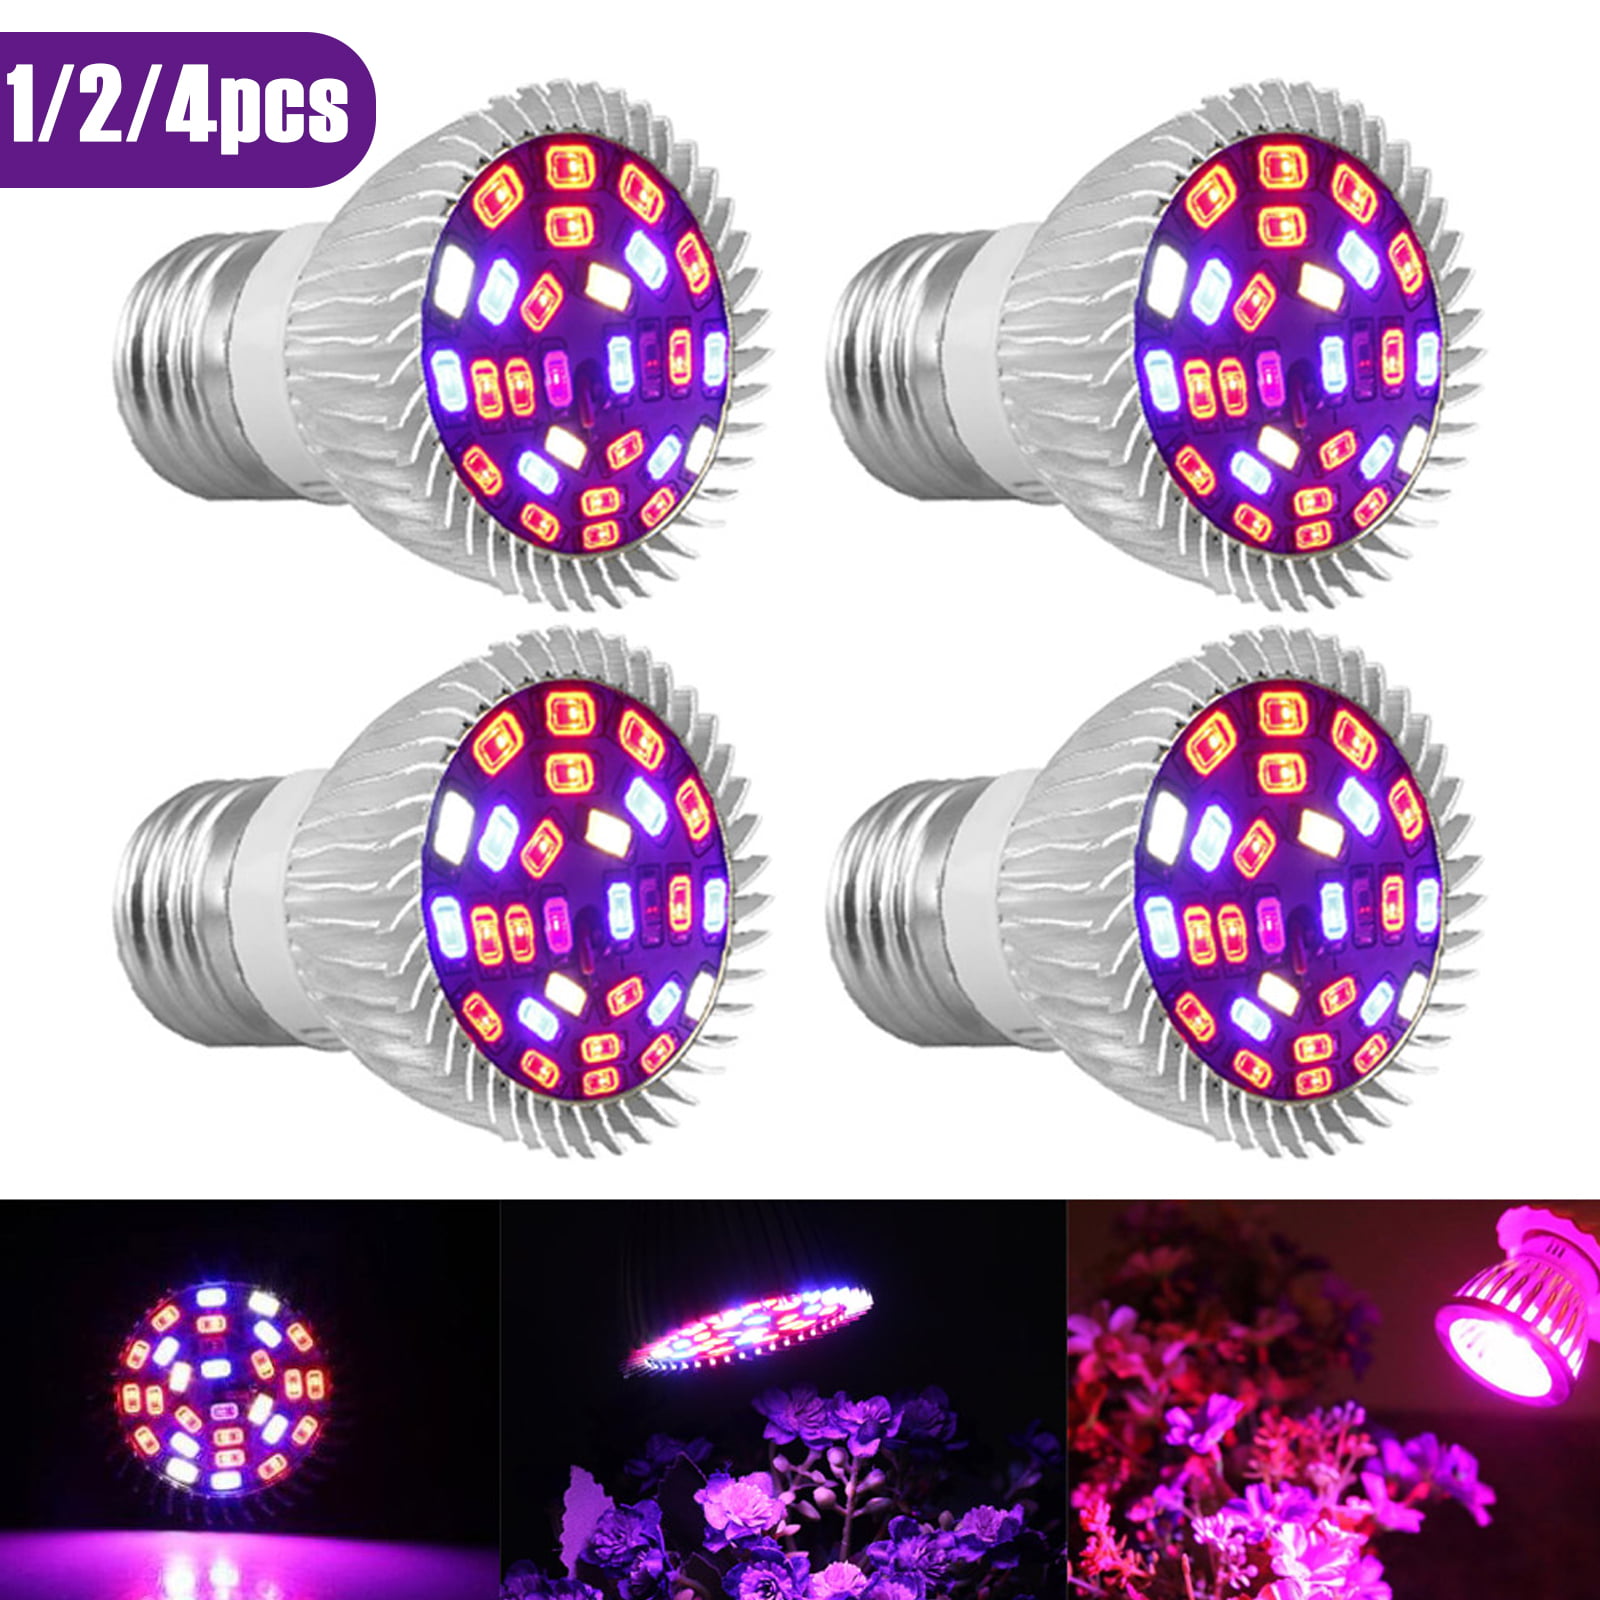 100W LED Grow Light E27 Full Spectrum For Hydroponic Growing Plants Greenhouse 